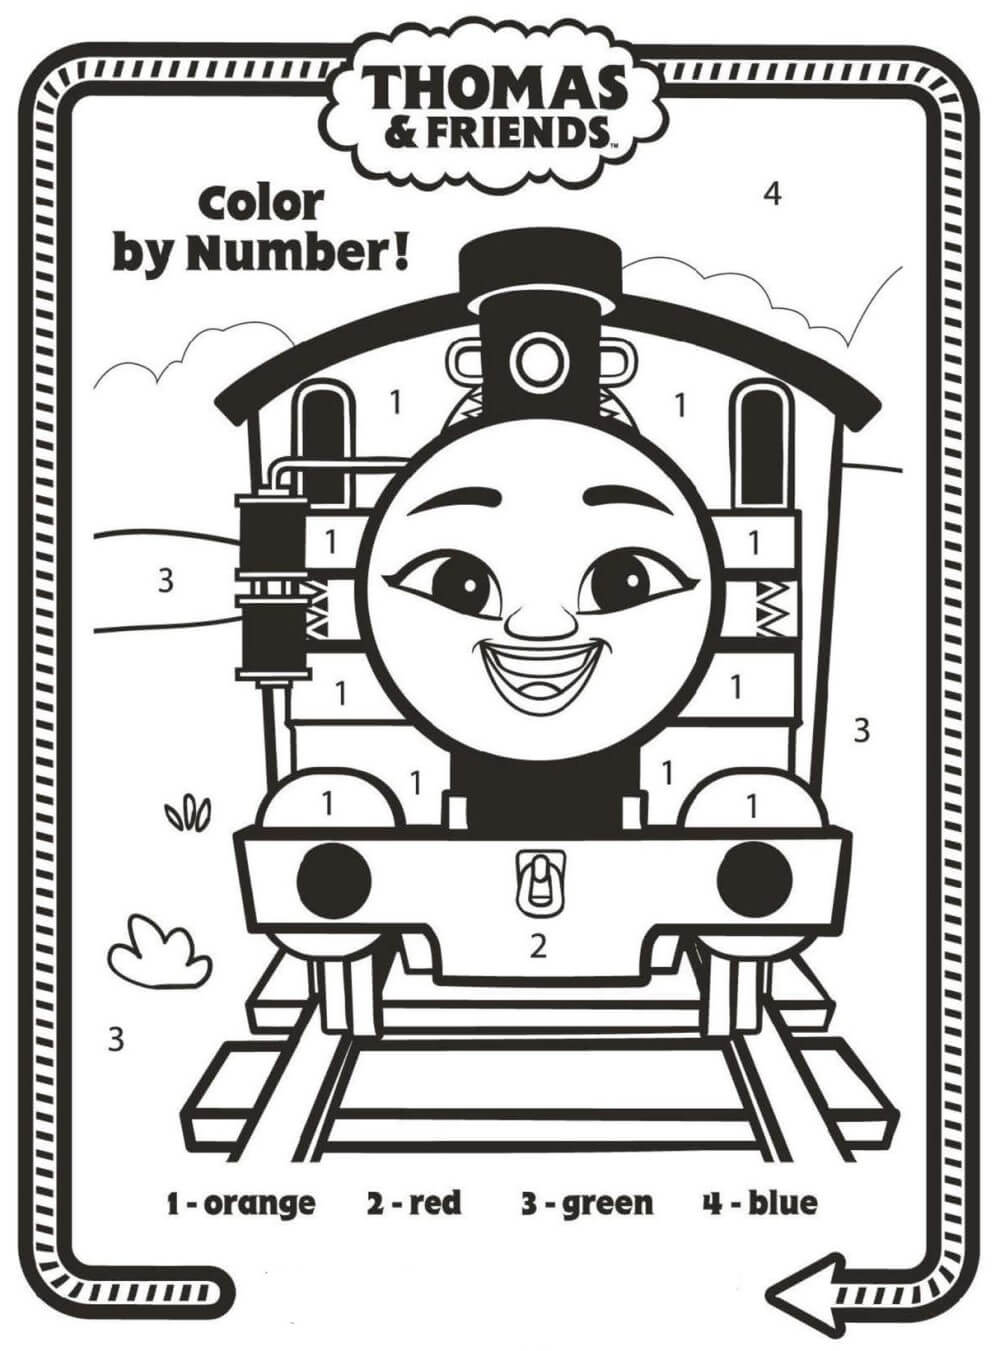 Thomas & friends color by number